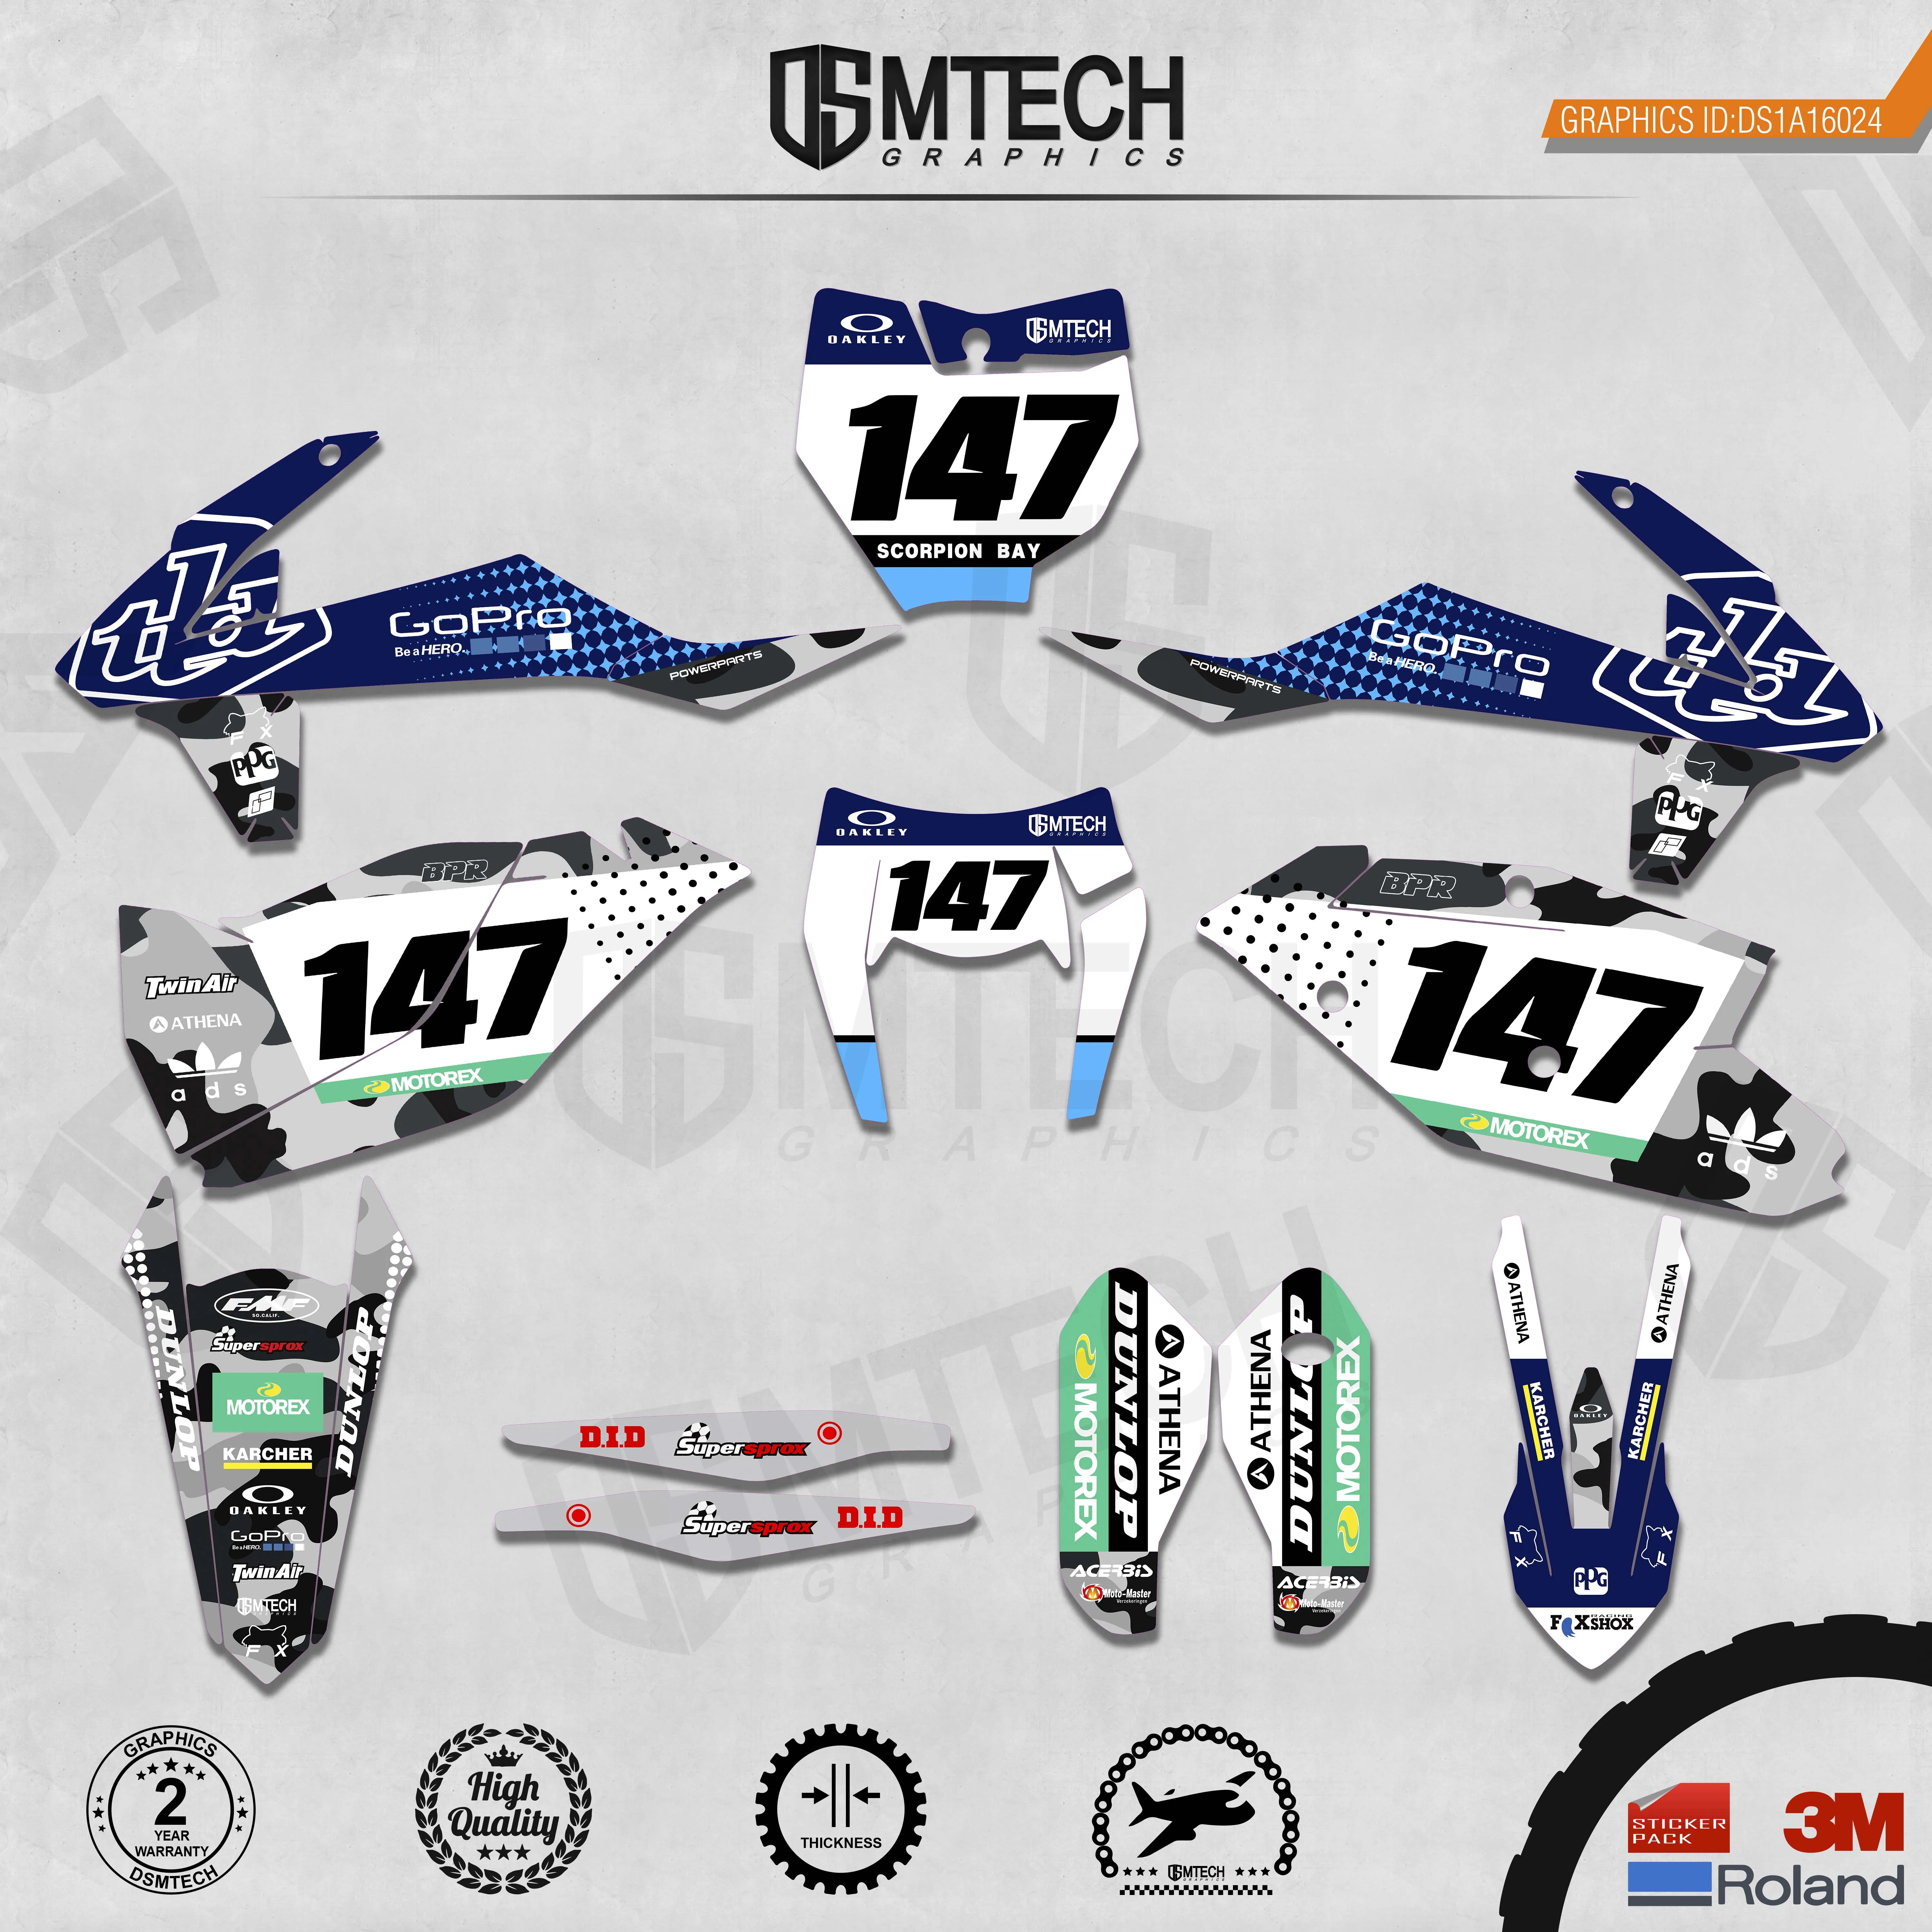 DSMTECH Customized Team Graphics Backgrounds Decals 3M Custom Stickers For KTM 2017-2019 EXC 2016-2018 SXF  024